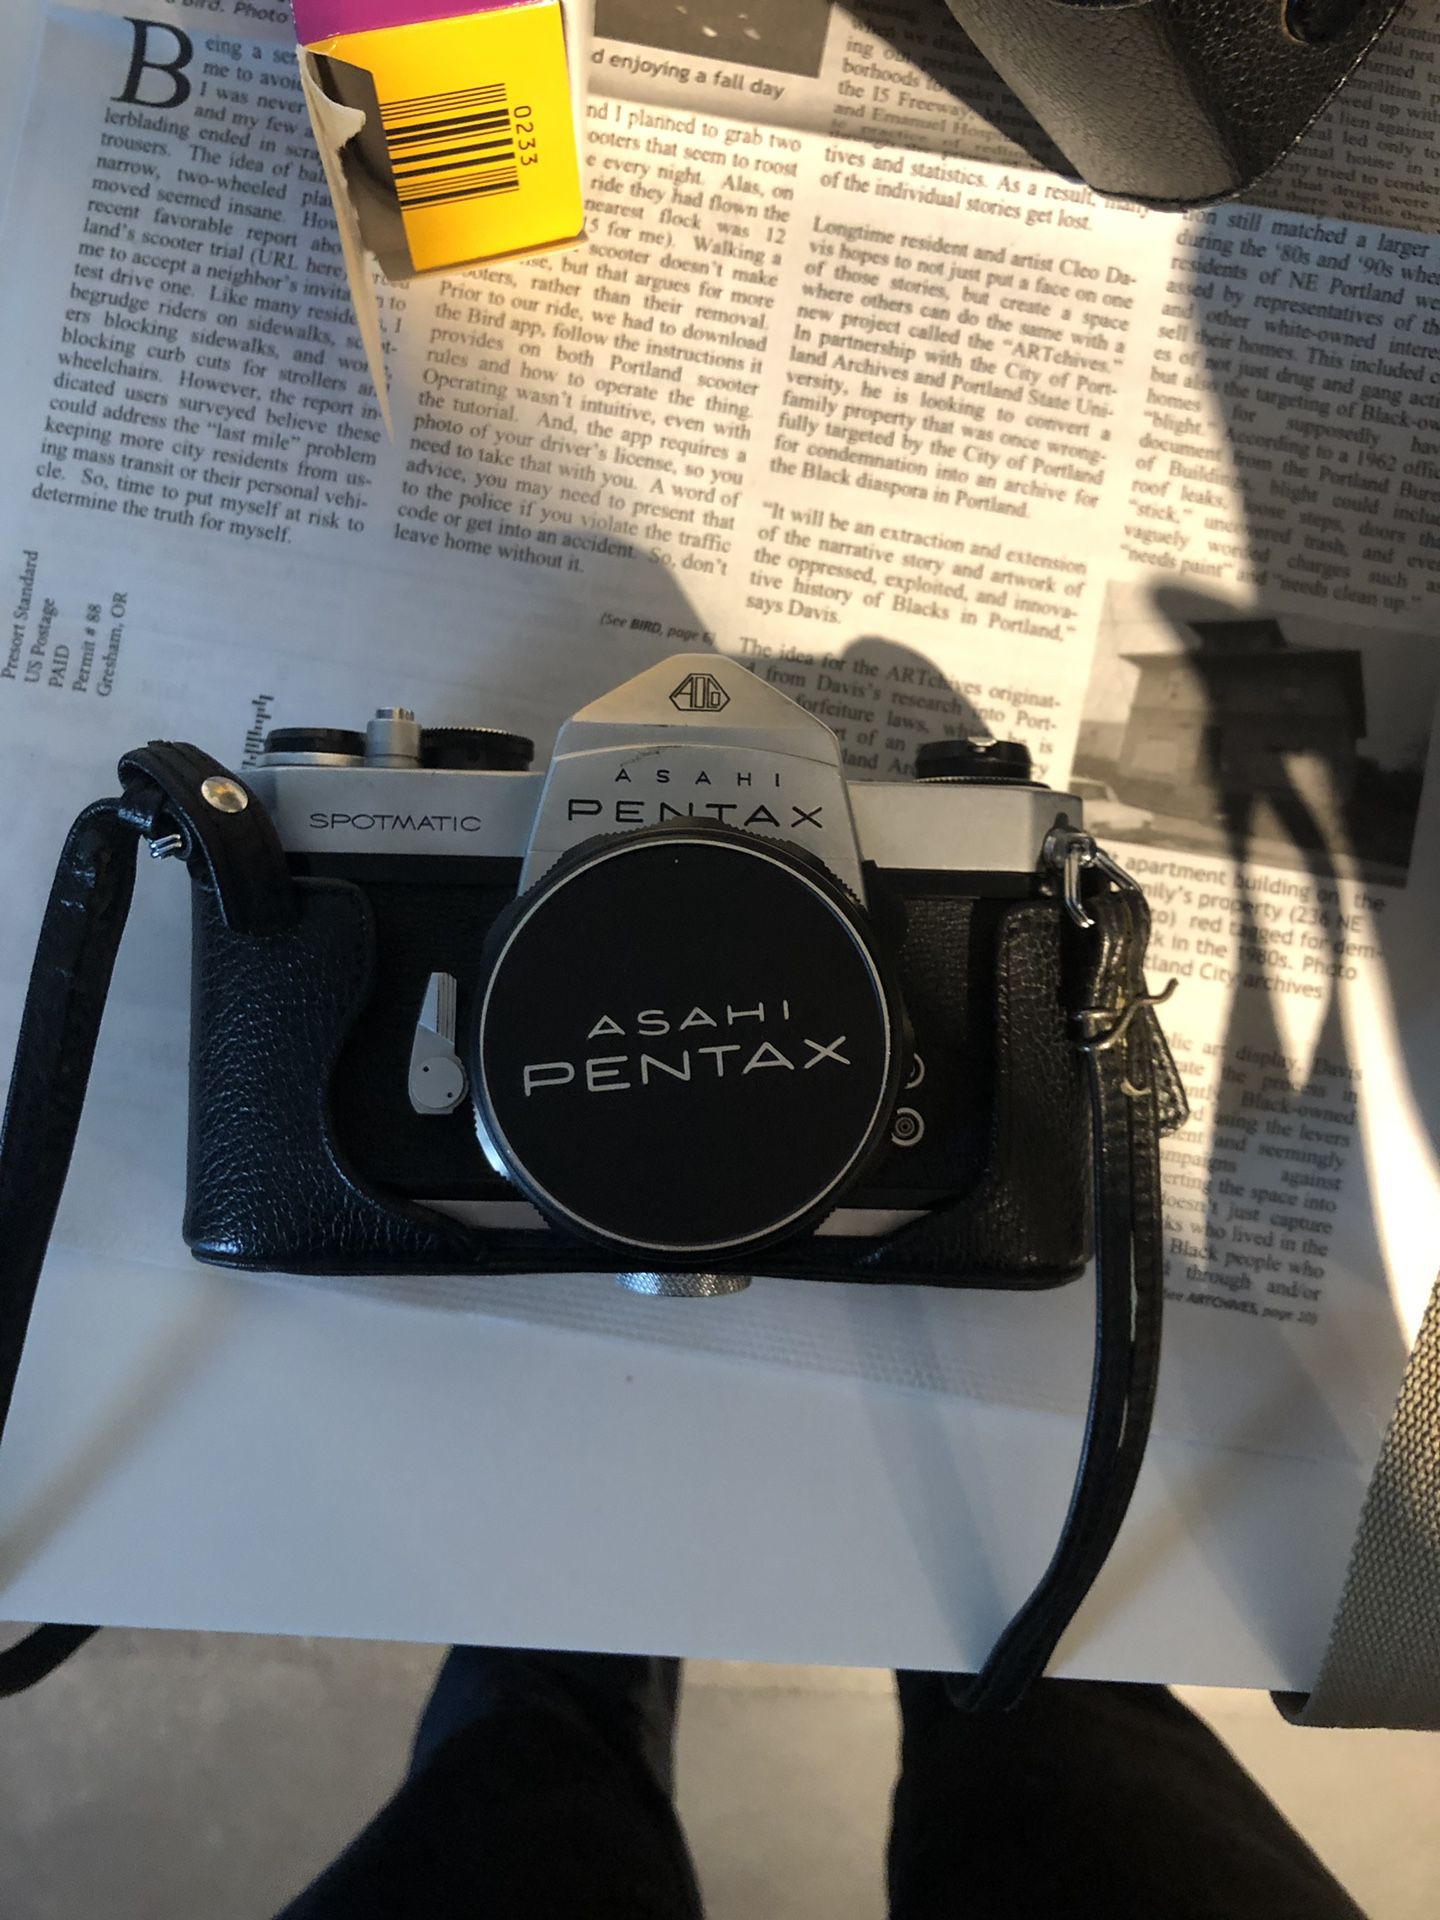 Pentax 35mm camera with accessories